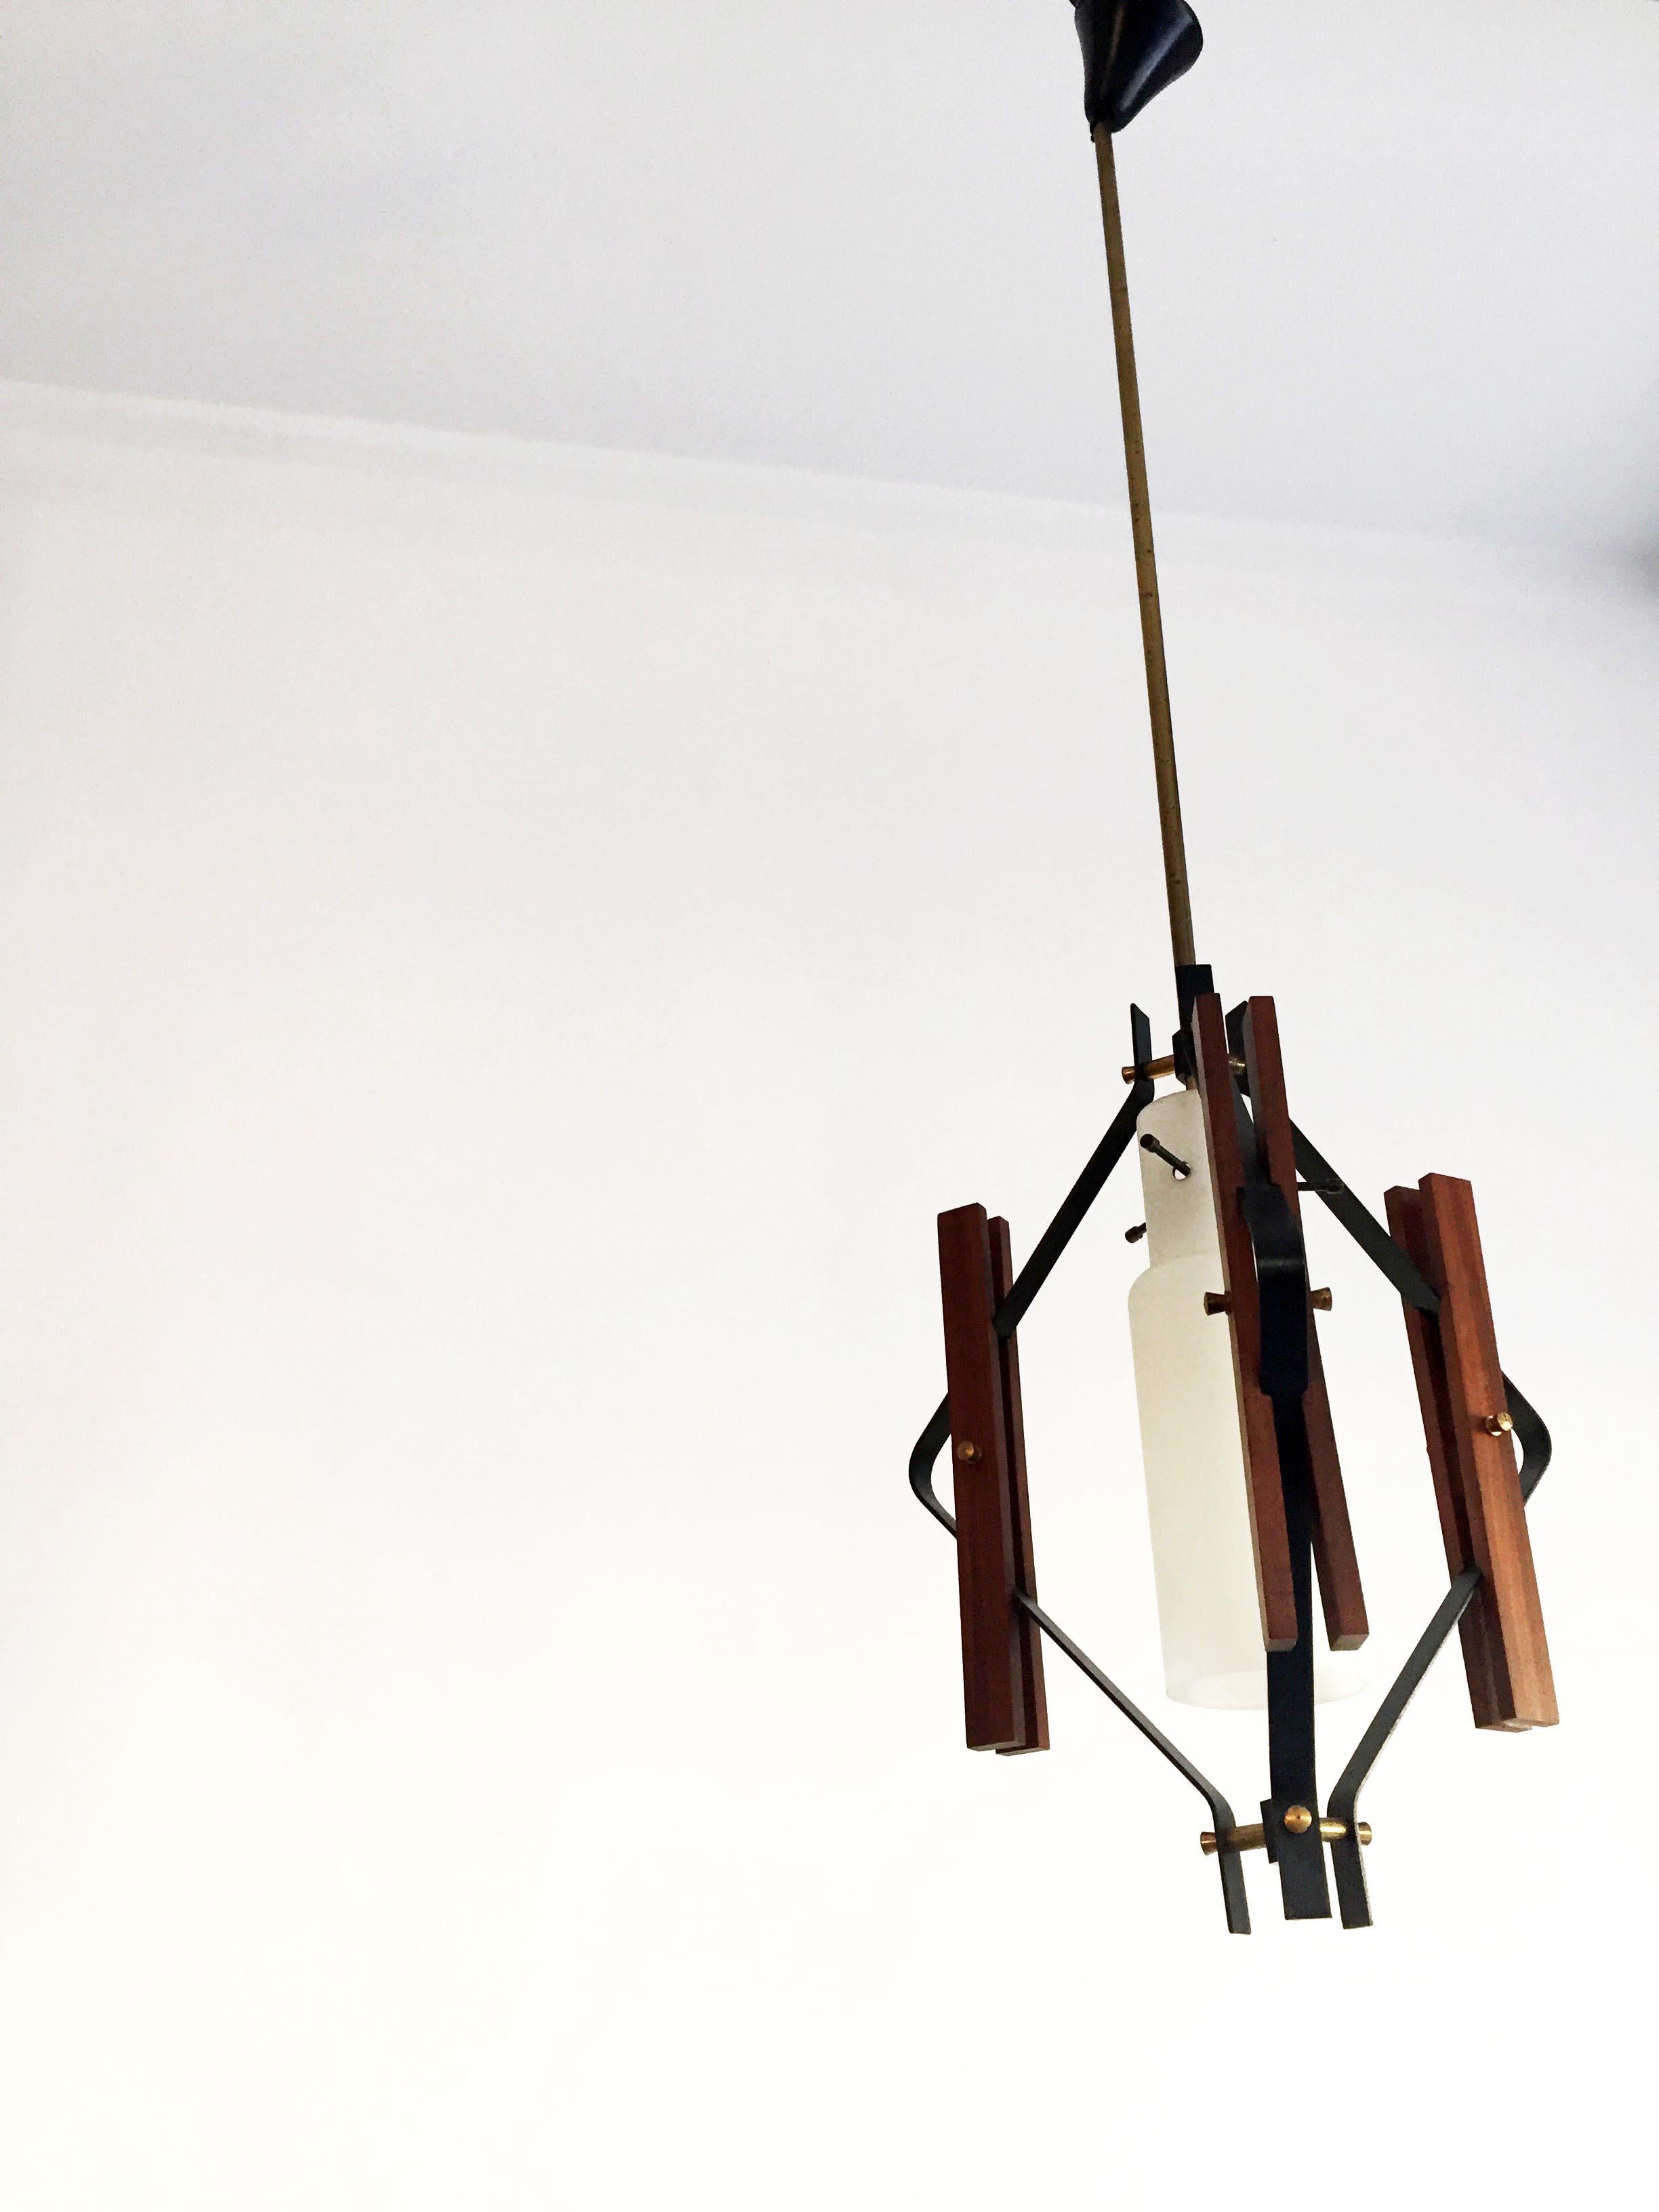 Painted Midcentury Ceiling Lamp in Teak Black Iron Opaline Glass and Brass Details, 1950 For Sale